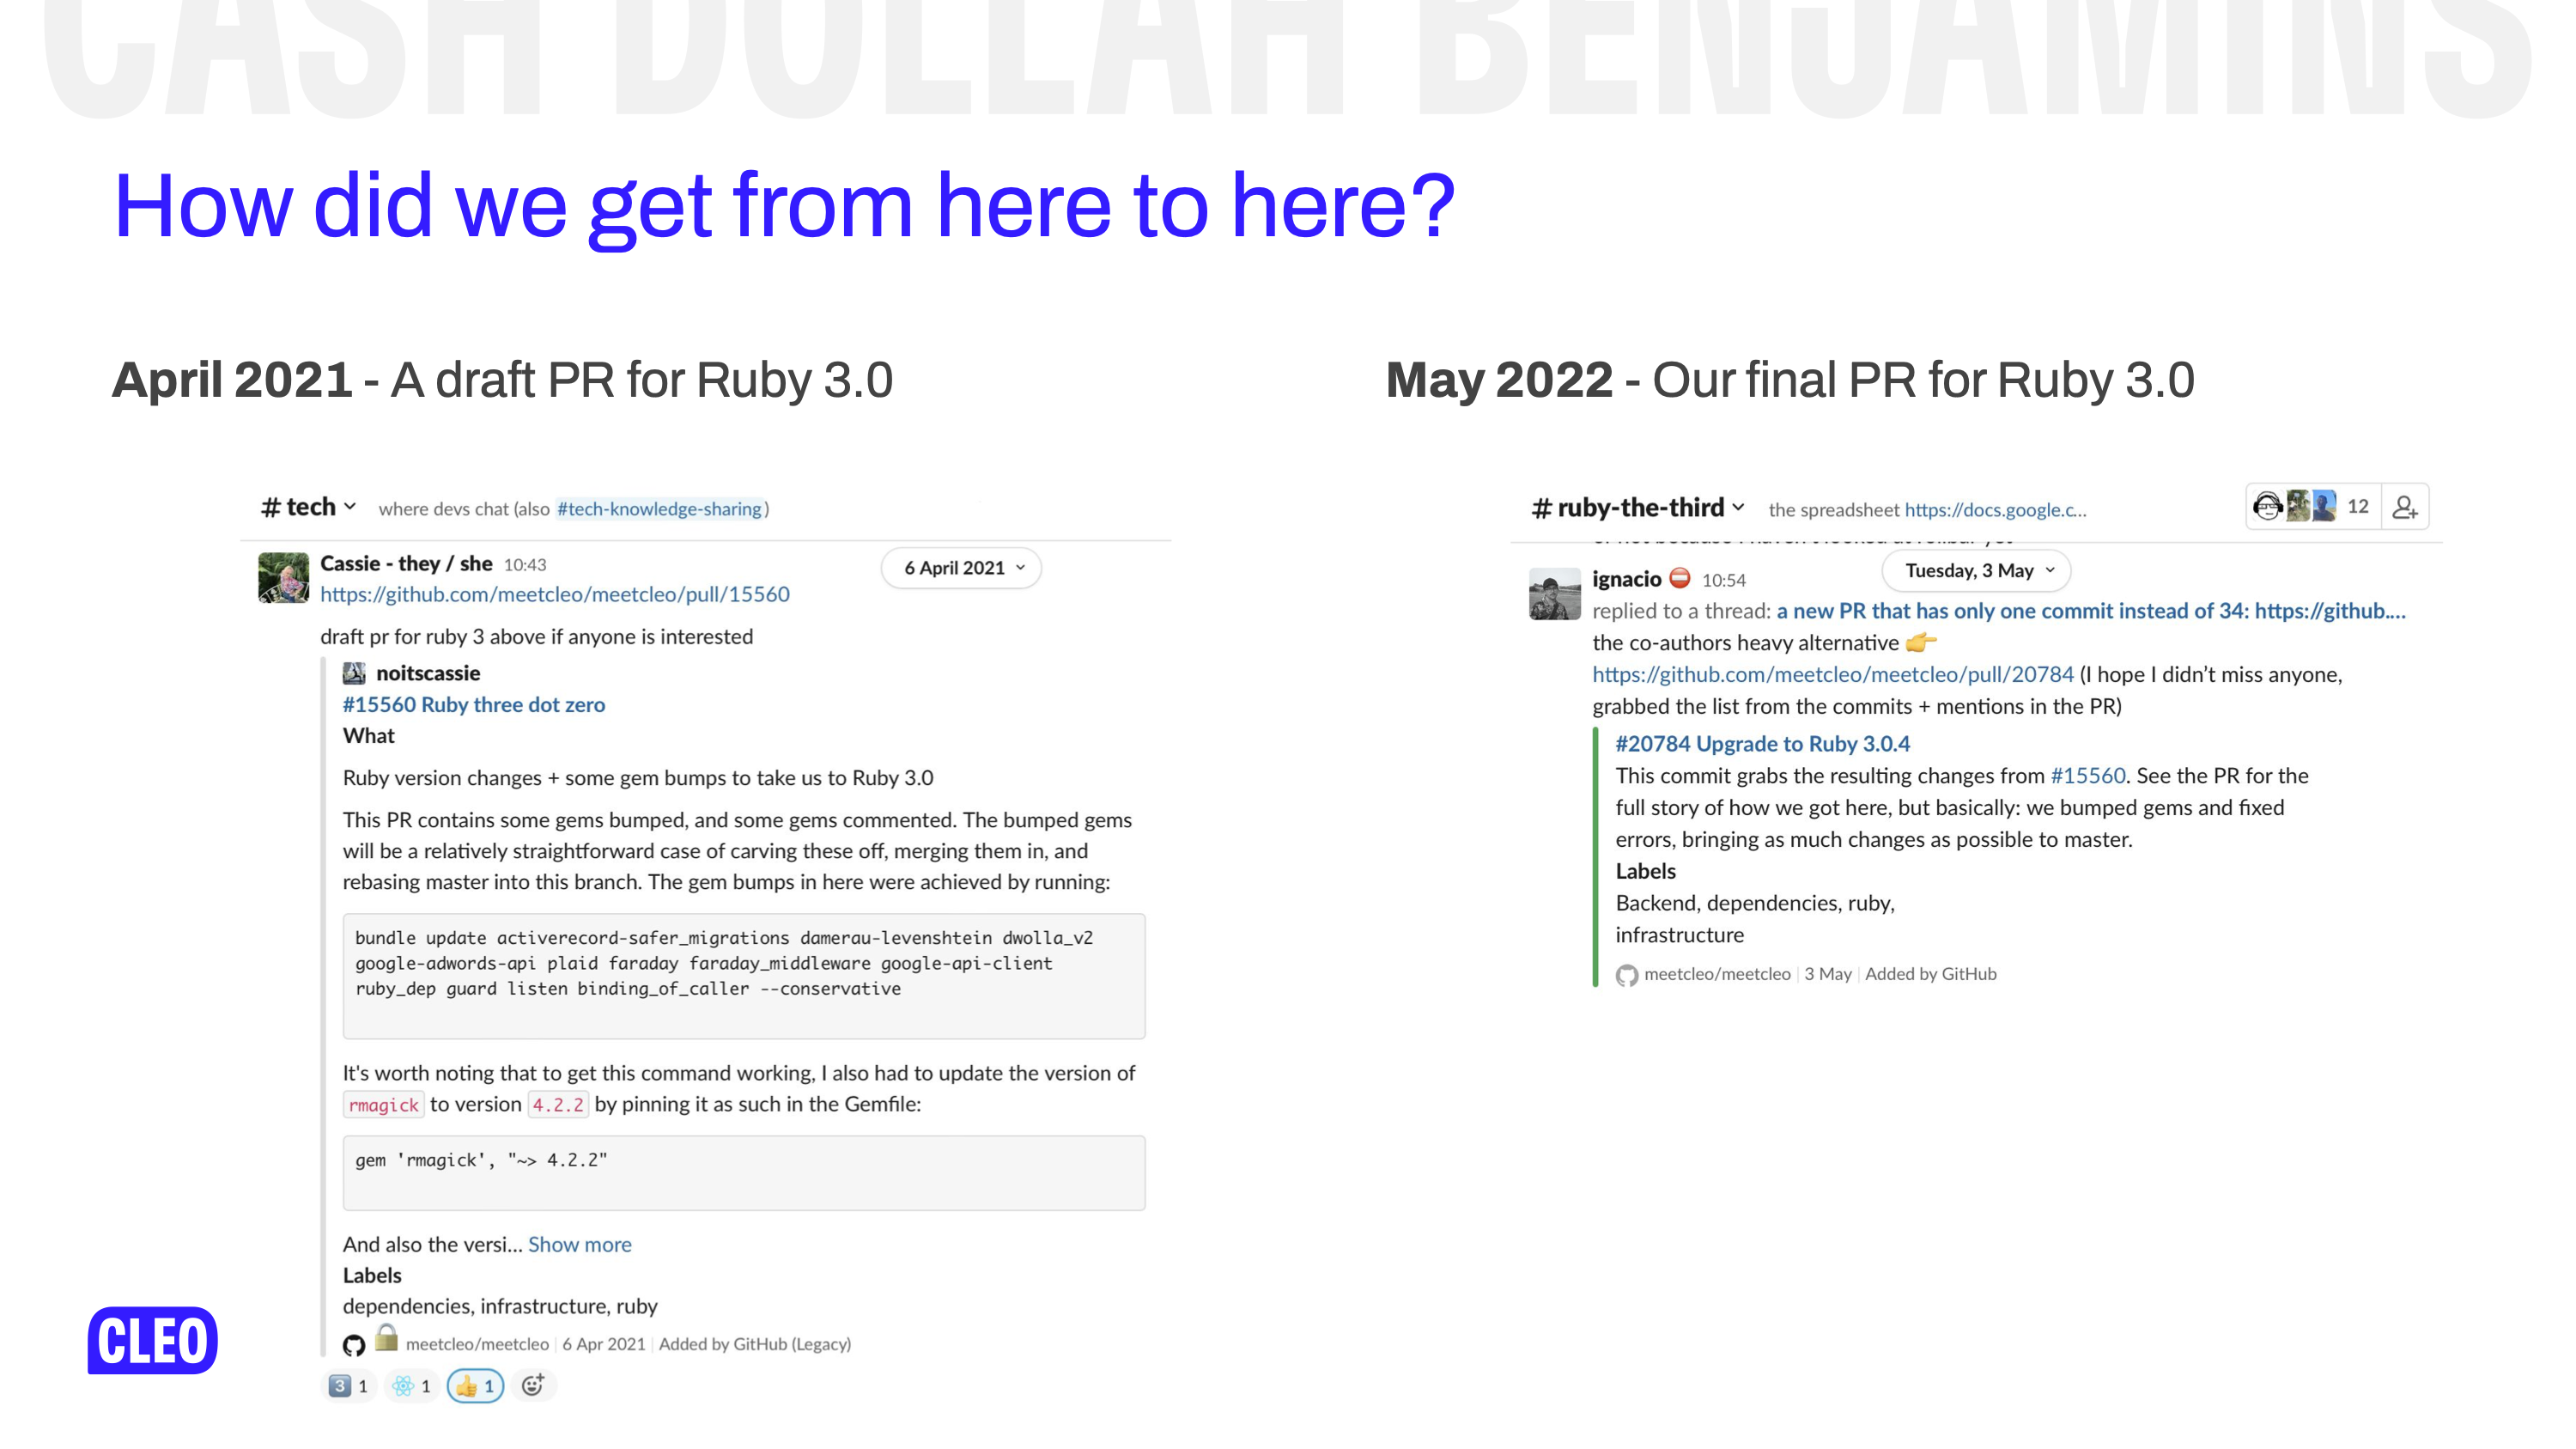 An image of our initial draft PR attempting the upgrade from April 2021 and an image of our final PR finsihing the upgrade from May 2022; text: How did we get from here to here?  April 2021 - A draft PR from ruby 3.0, May 2022 - Our final PR for ruby 3.0